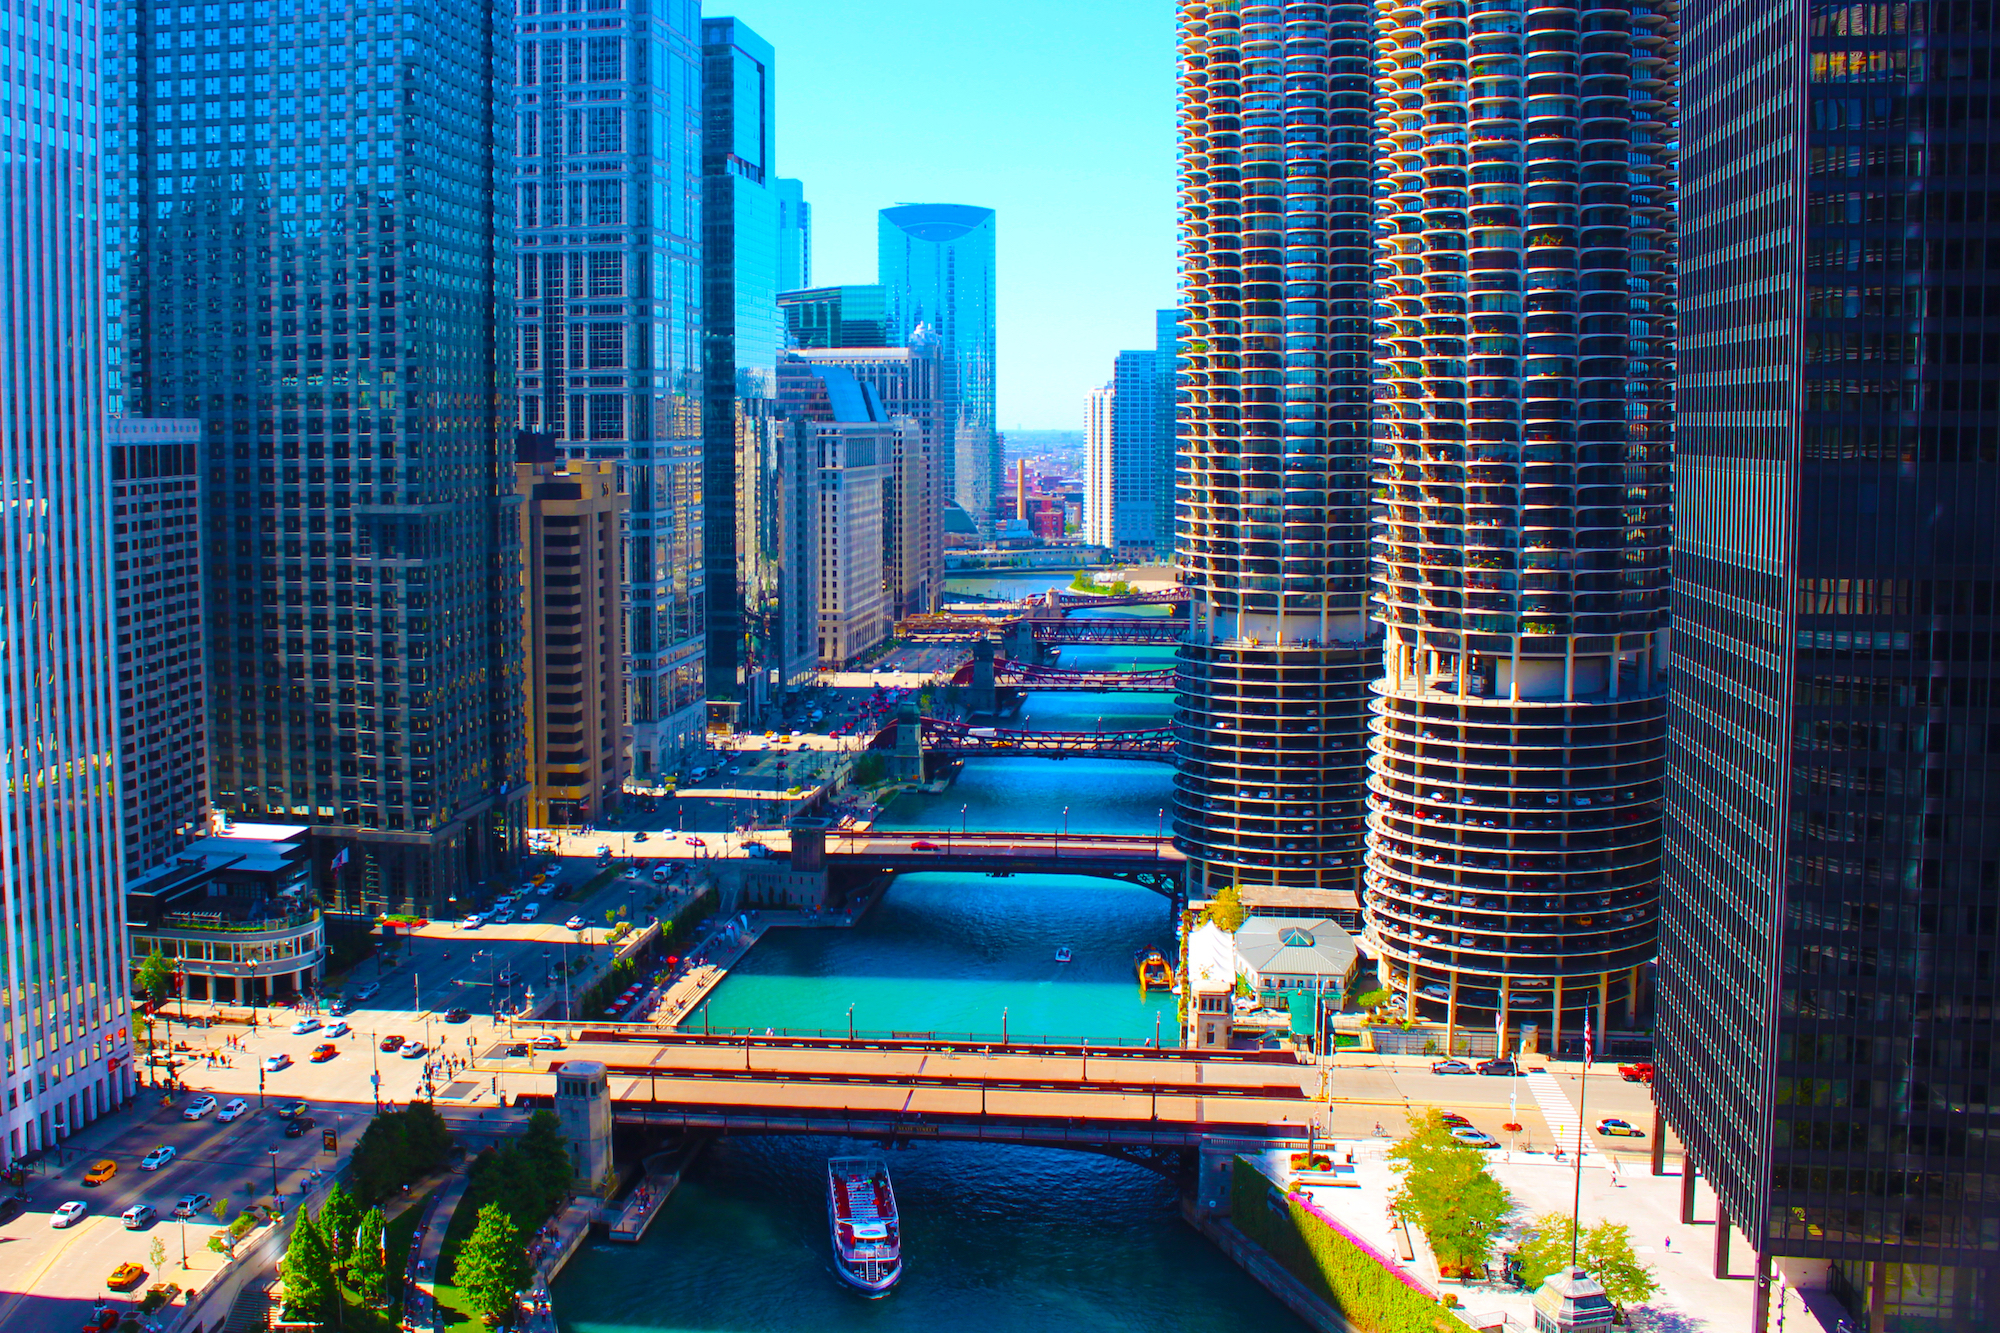 A photo of the Chicago River.